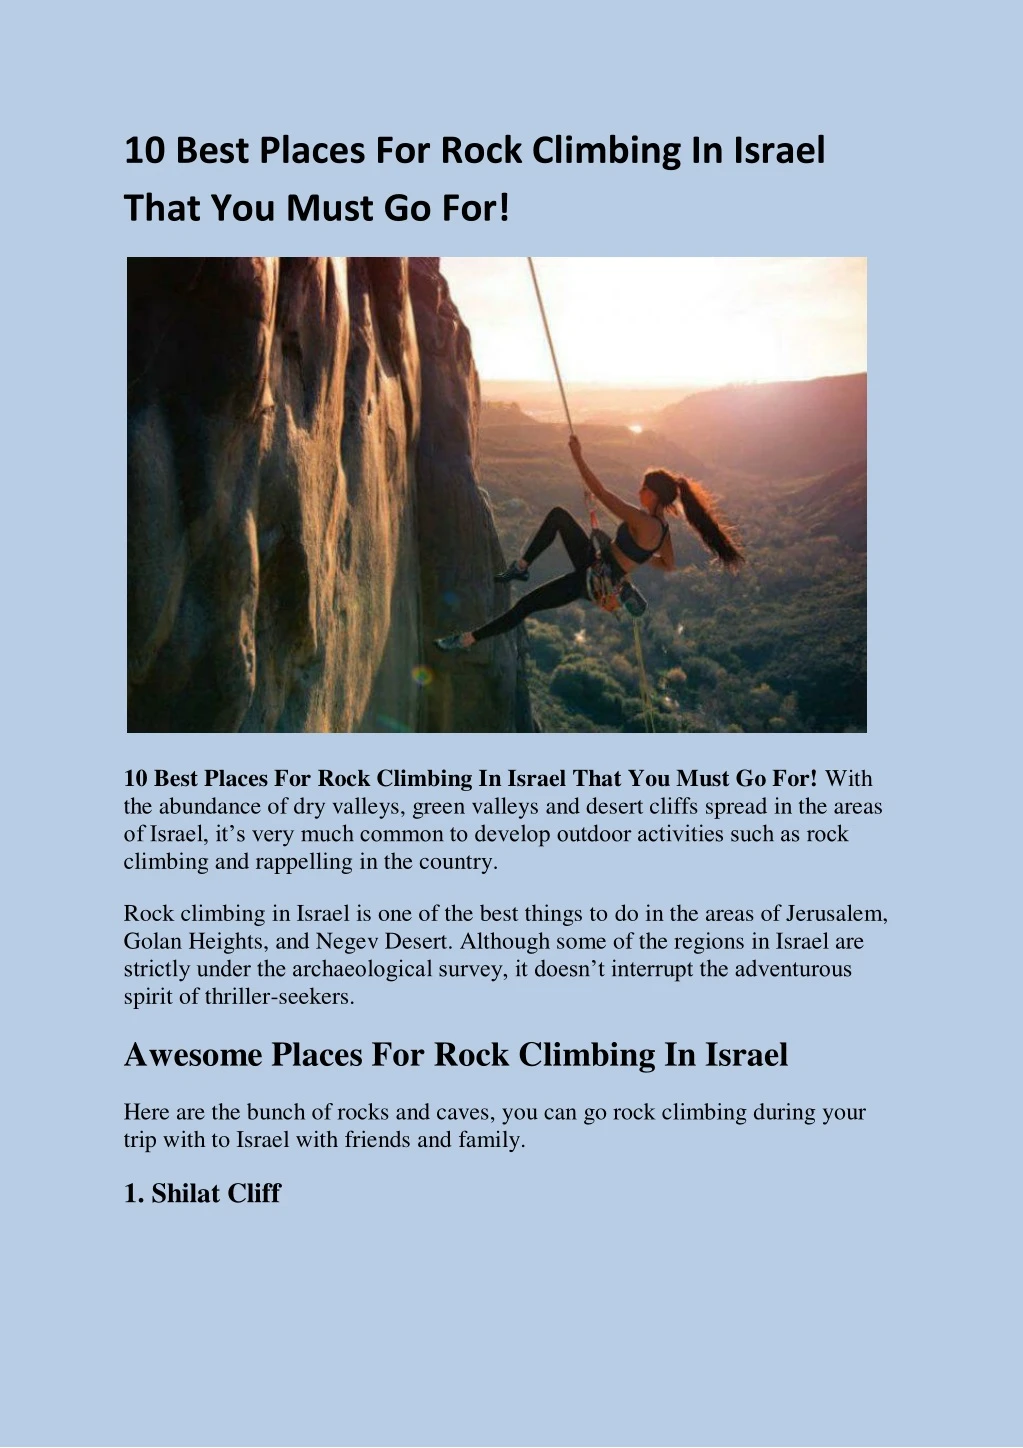 10 best places for rock climbing in israel that